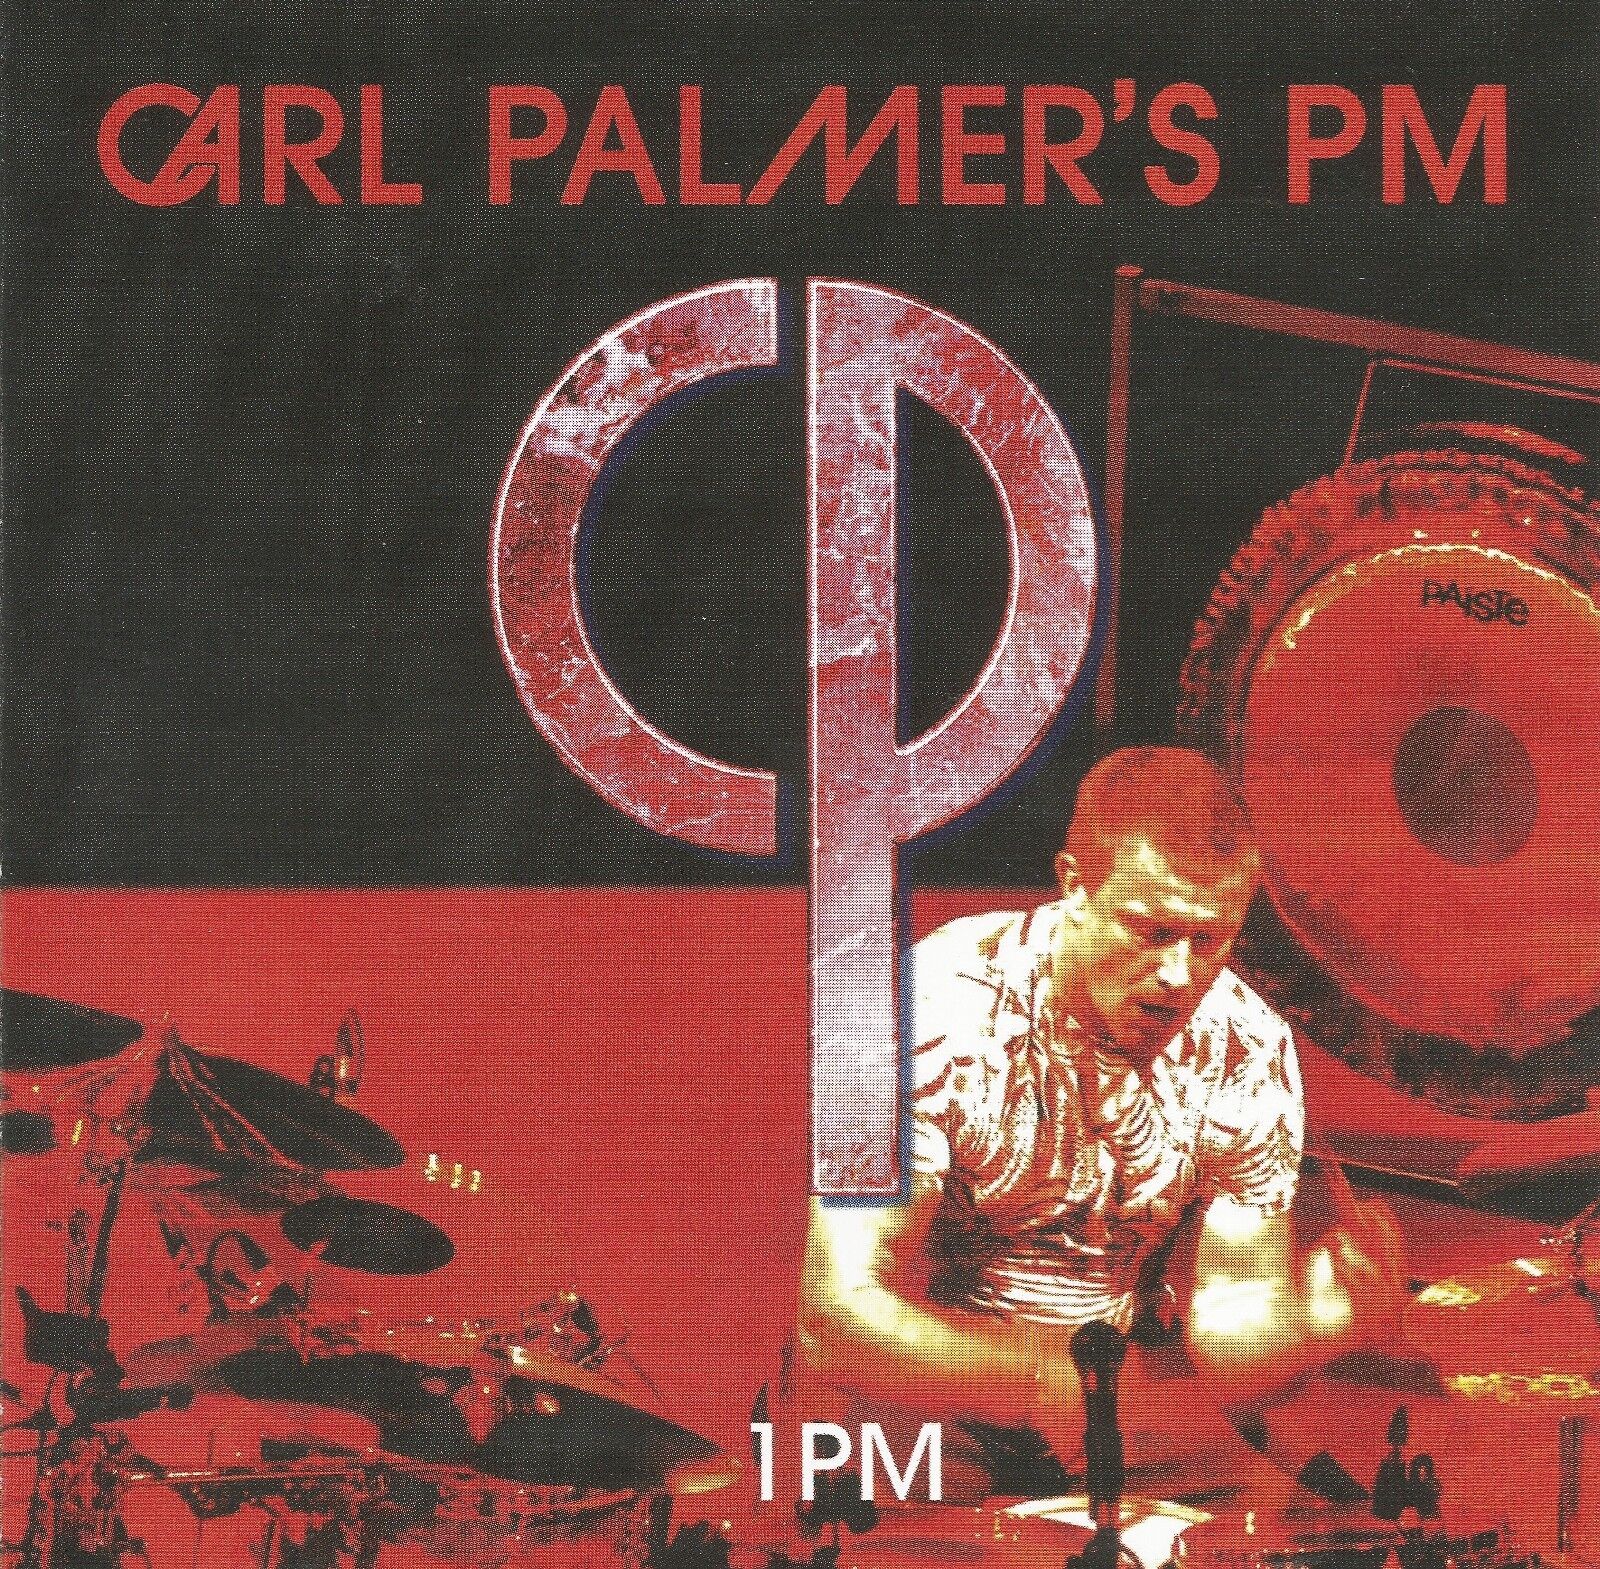 1:PM * by Carl Palmer\'s PM (CD, 2008, The Store for Music) ELP